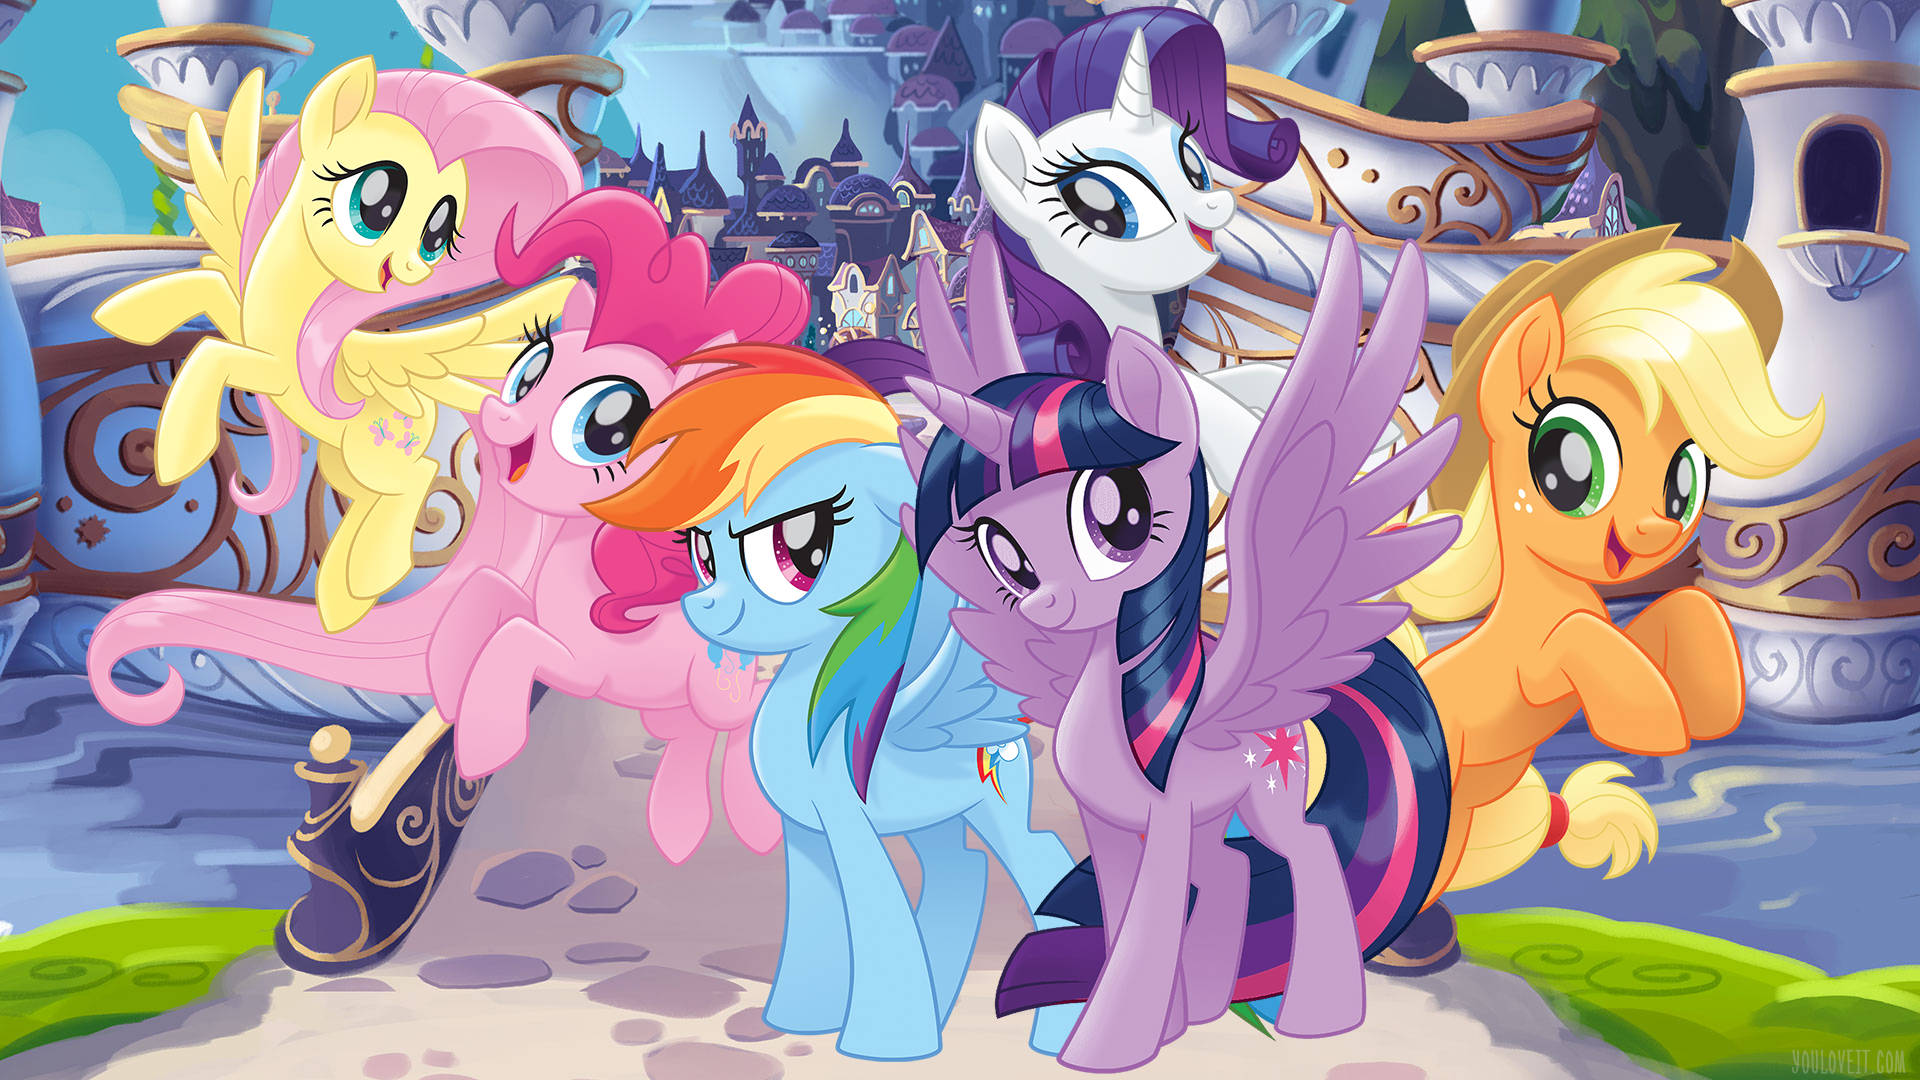 Enjoy The Colorful World Of Friendship With My Little Pony Desktop